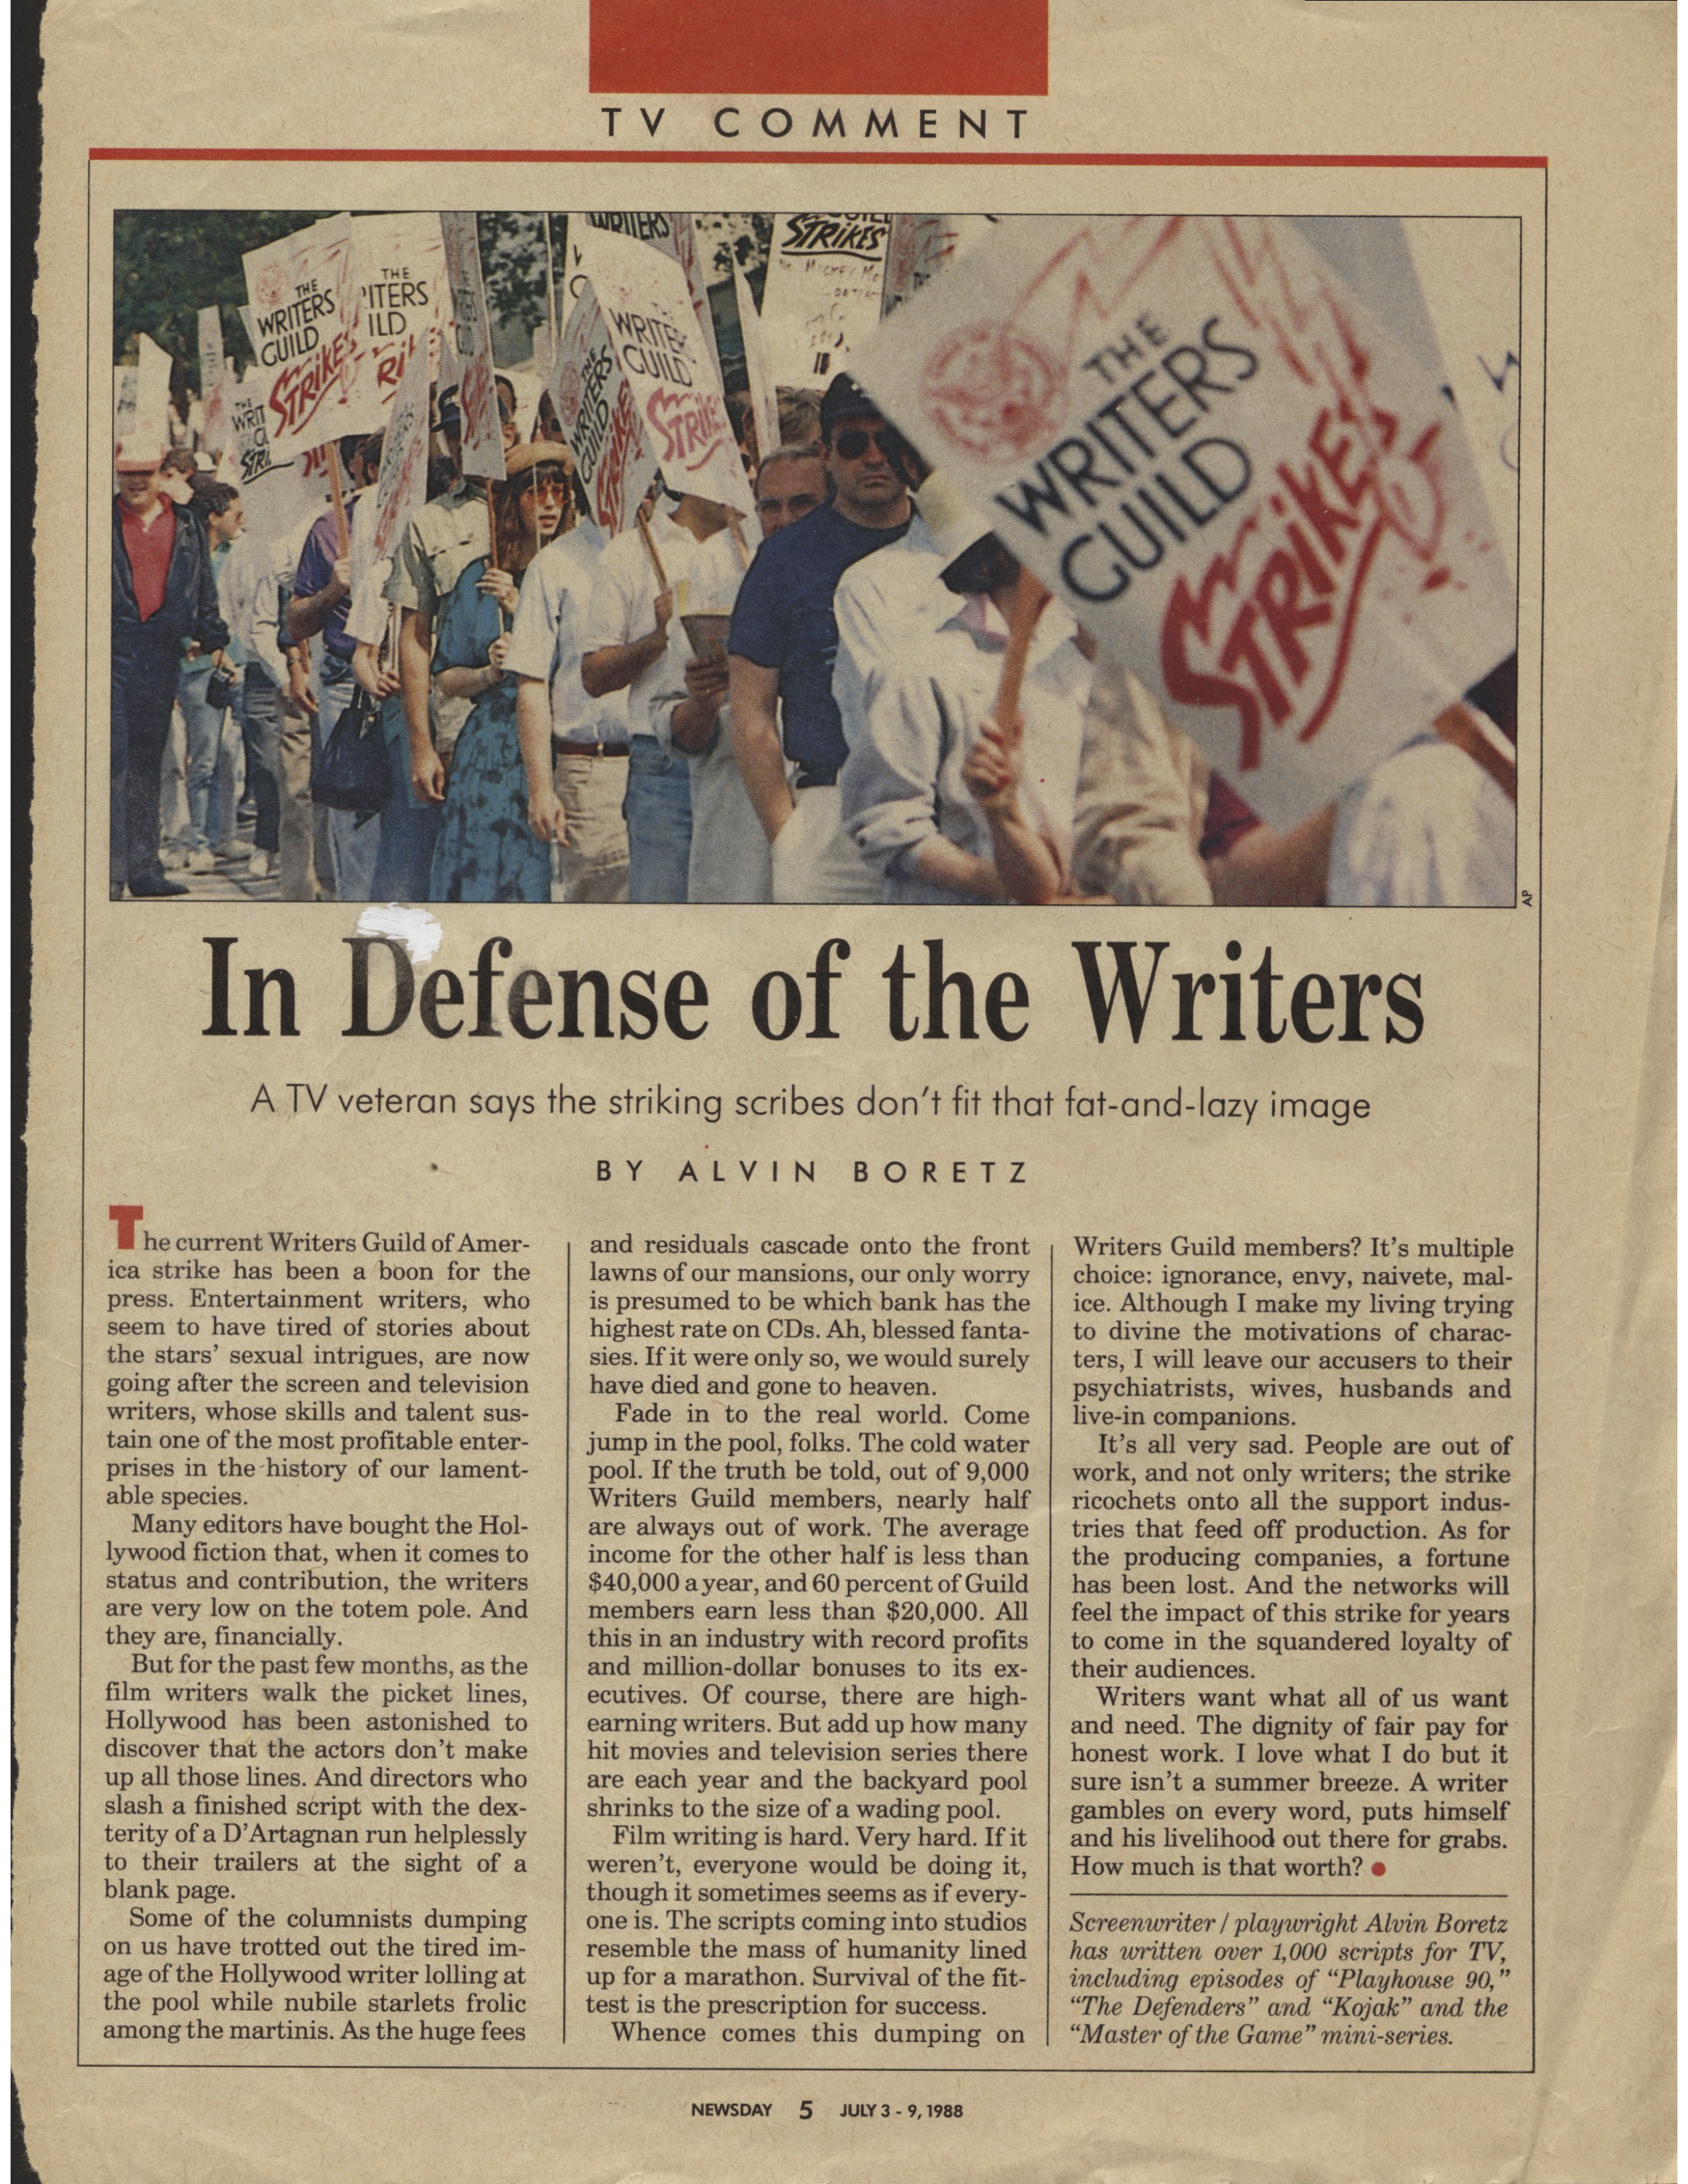 A color scan of a newspaper article. There is a photo at the top of several WGA members during the 1988 strike. The article headline is "In Defense of the Writers." There are three columns of text.